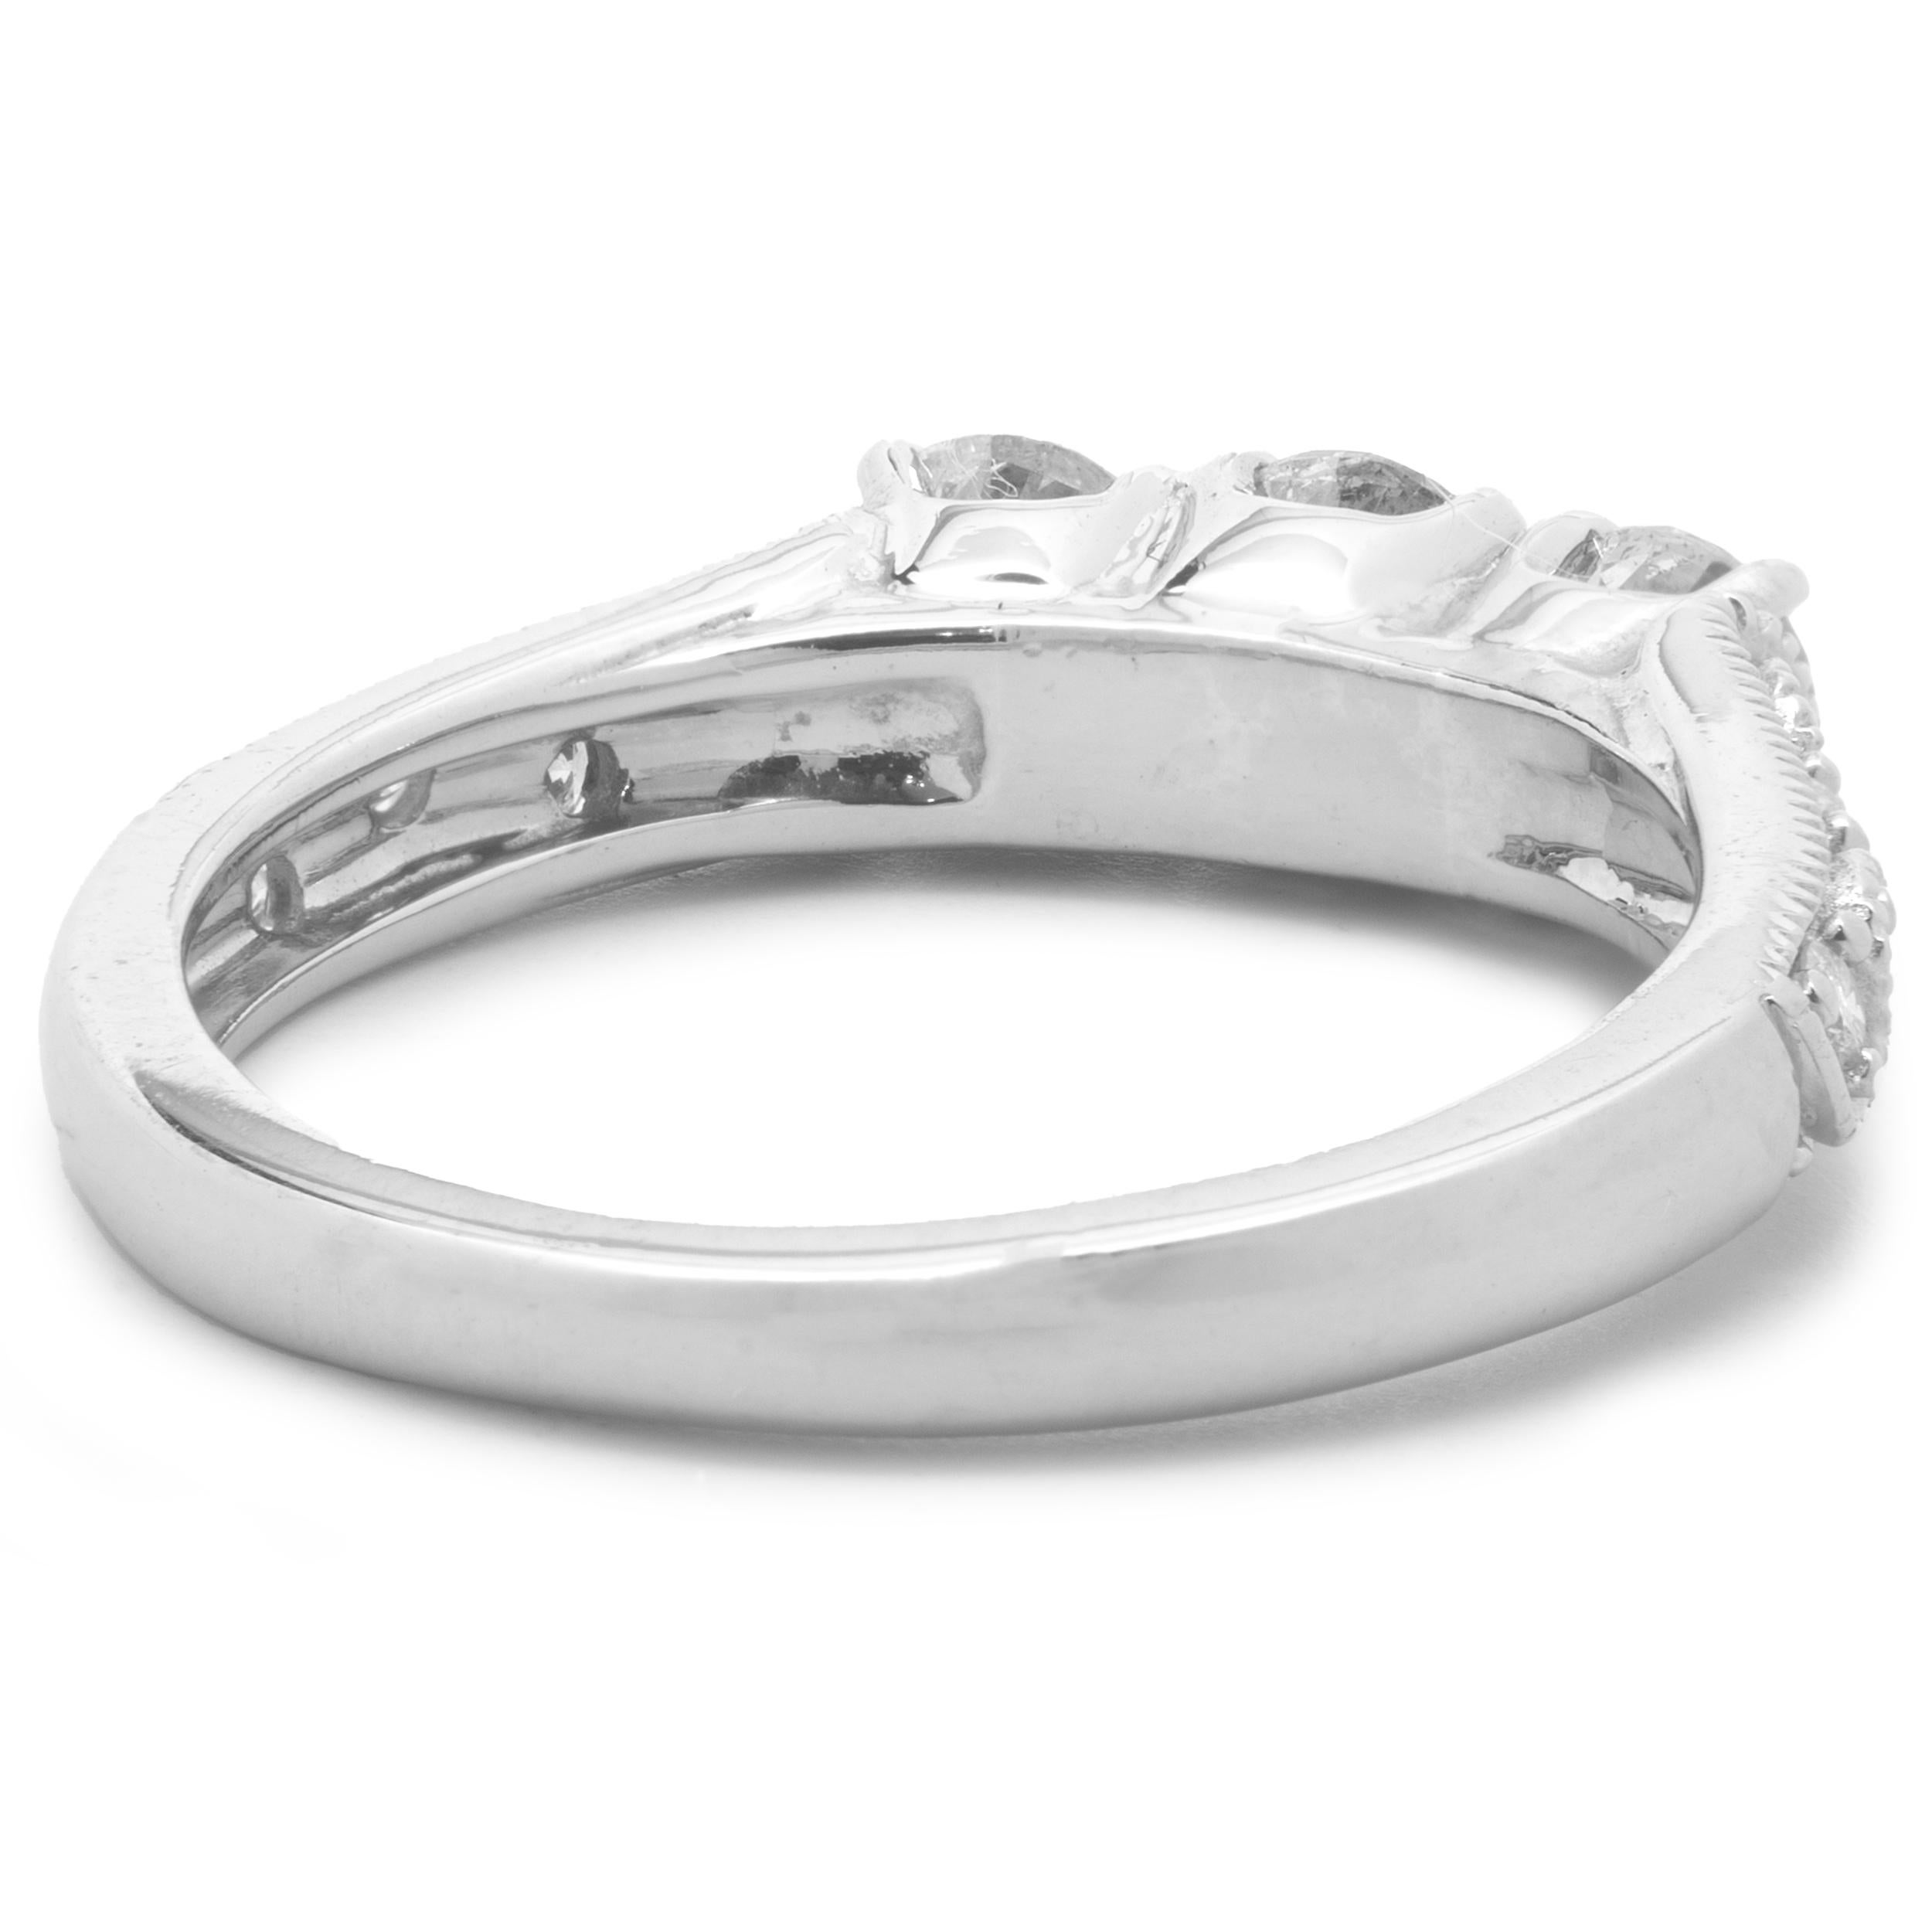 14 Karat White Gold Diamond Three Stone Band In Excellent Condition For Sale In Scottsdale, AZ